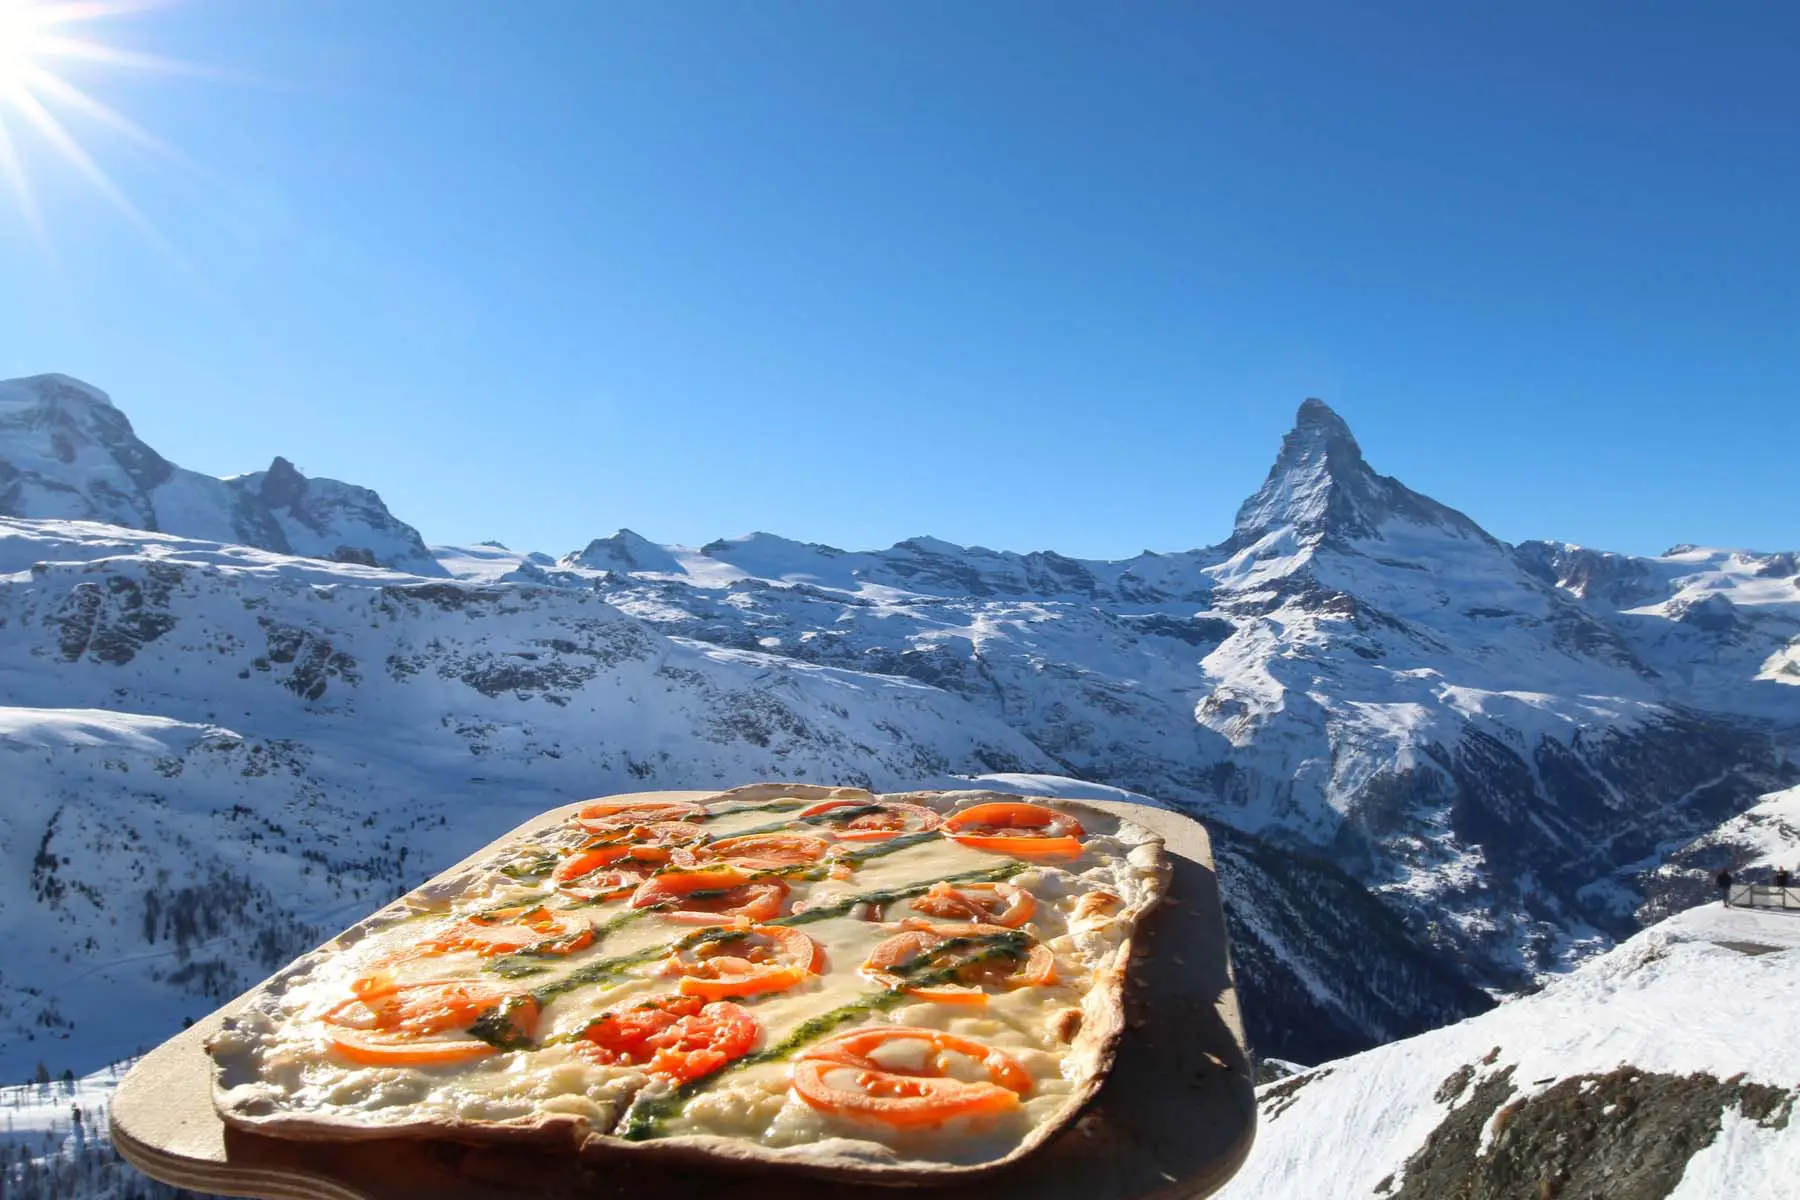 Pizza on a platter in the Swiss mountains